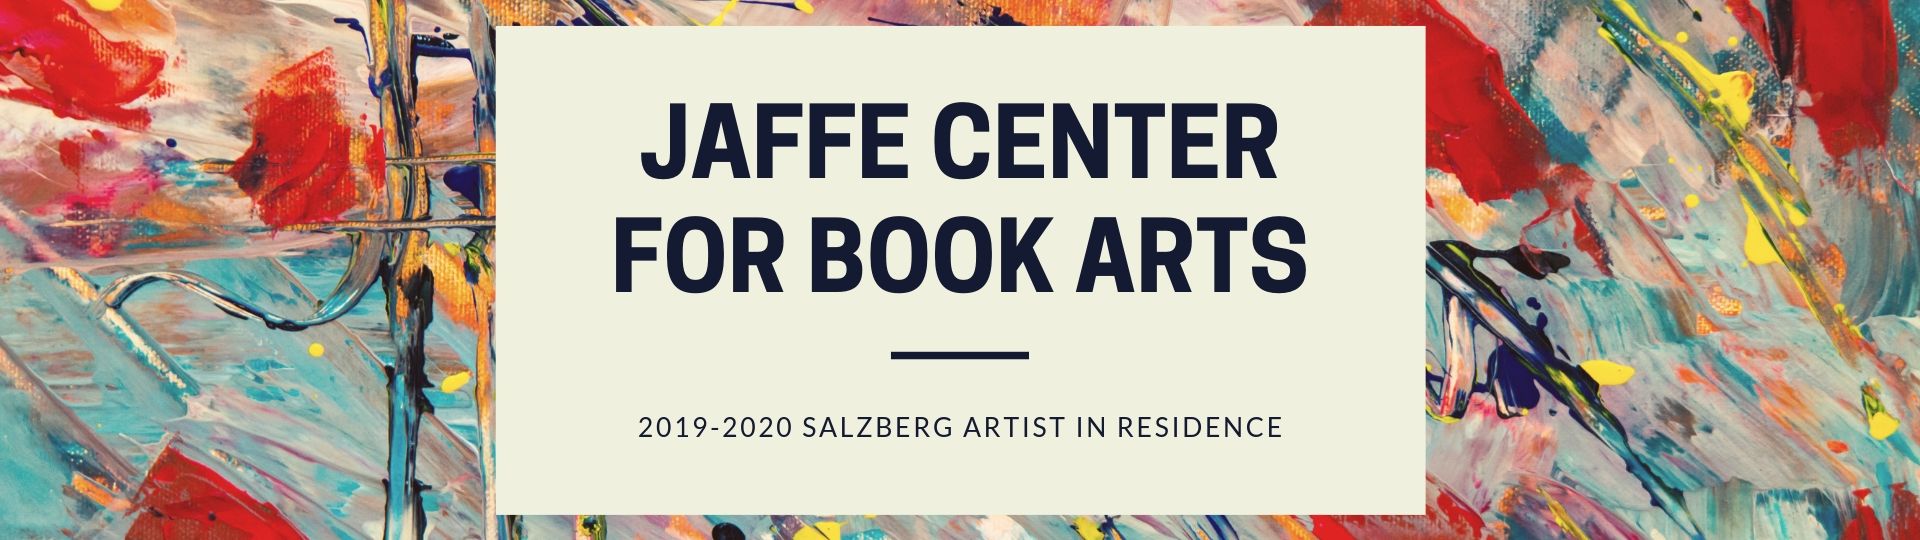 The Jaffe Center For Book Arts Chooses Its Next Artist in Residence 